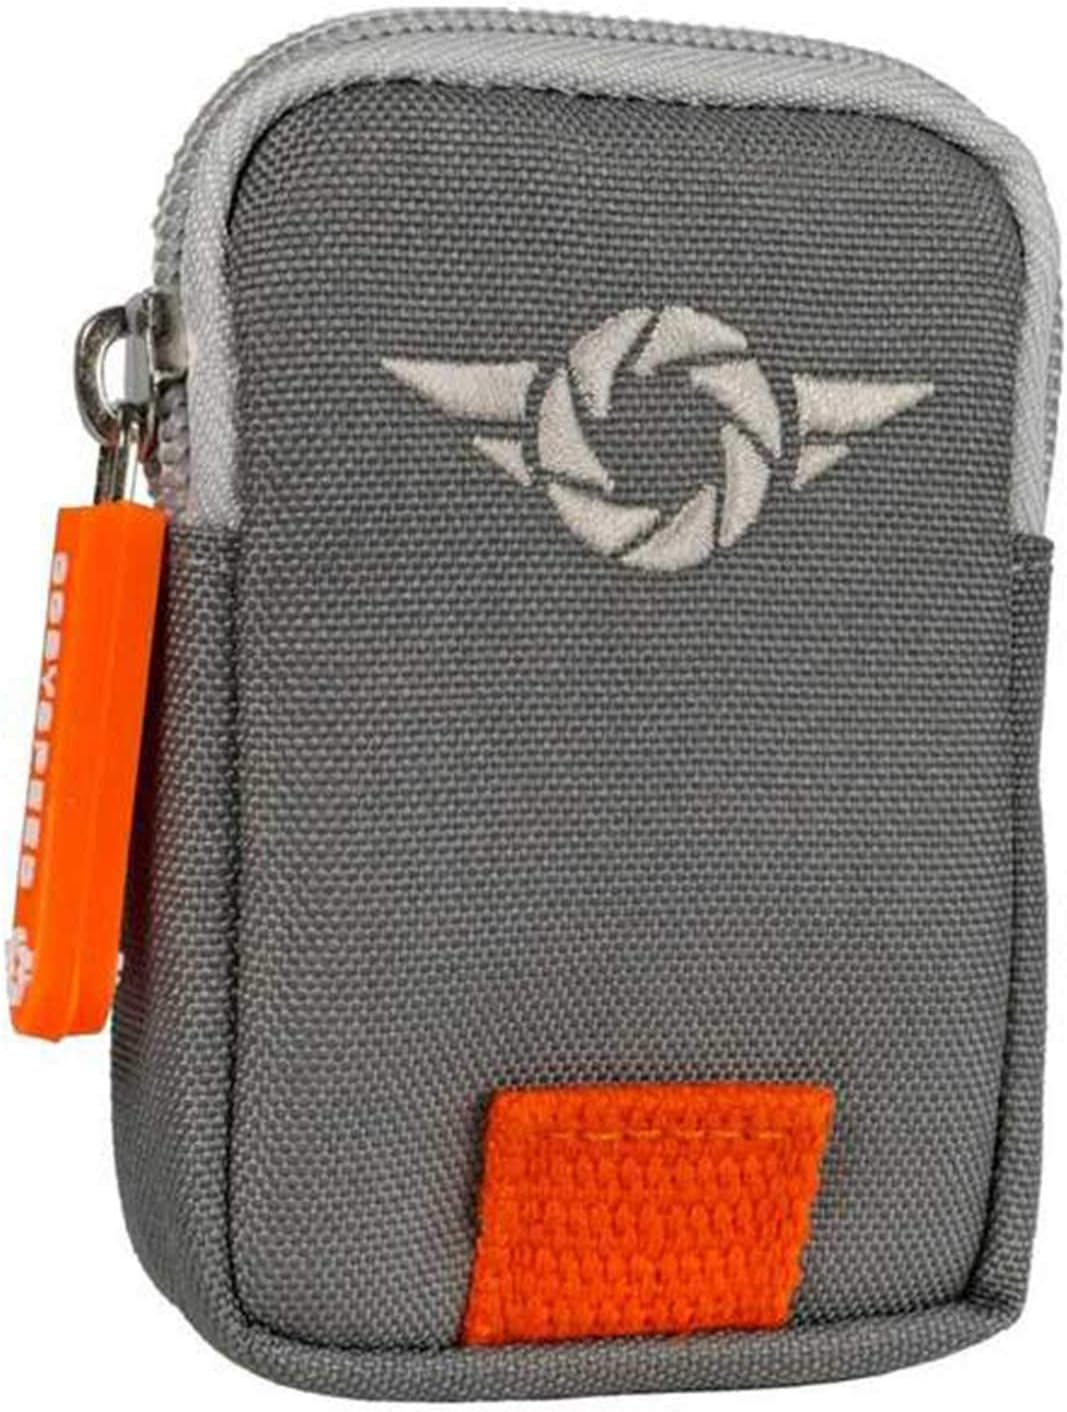 COSYSPEED ST-Wallet for SD-Cards, Credit Cards, Money with RFID Blocker (three colours)